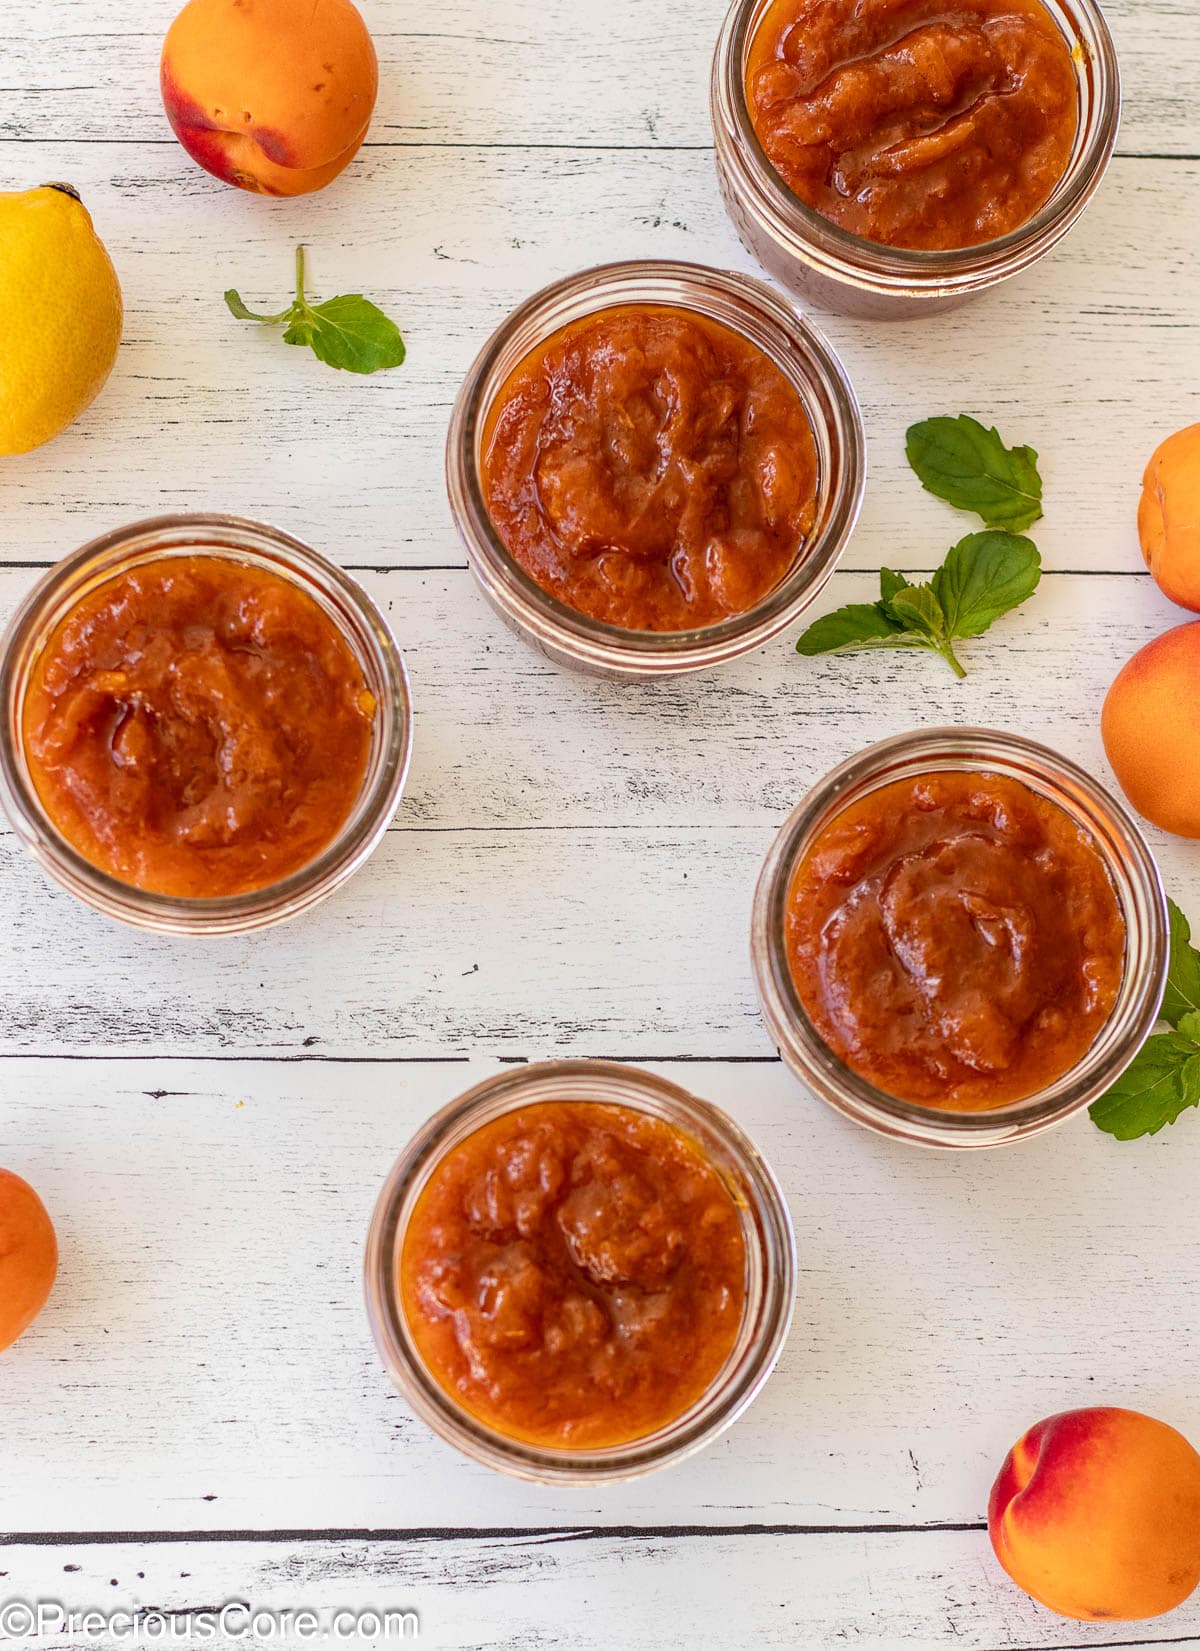 5 open jars filled with apricot preserves.